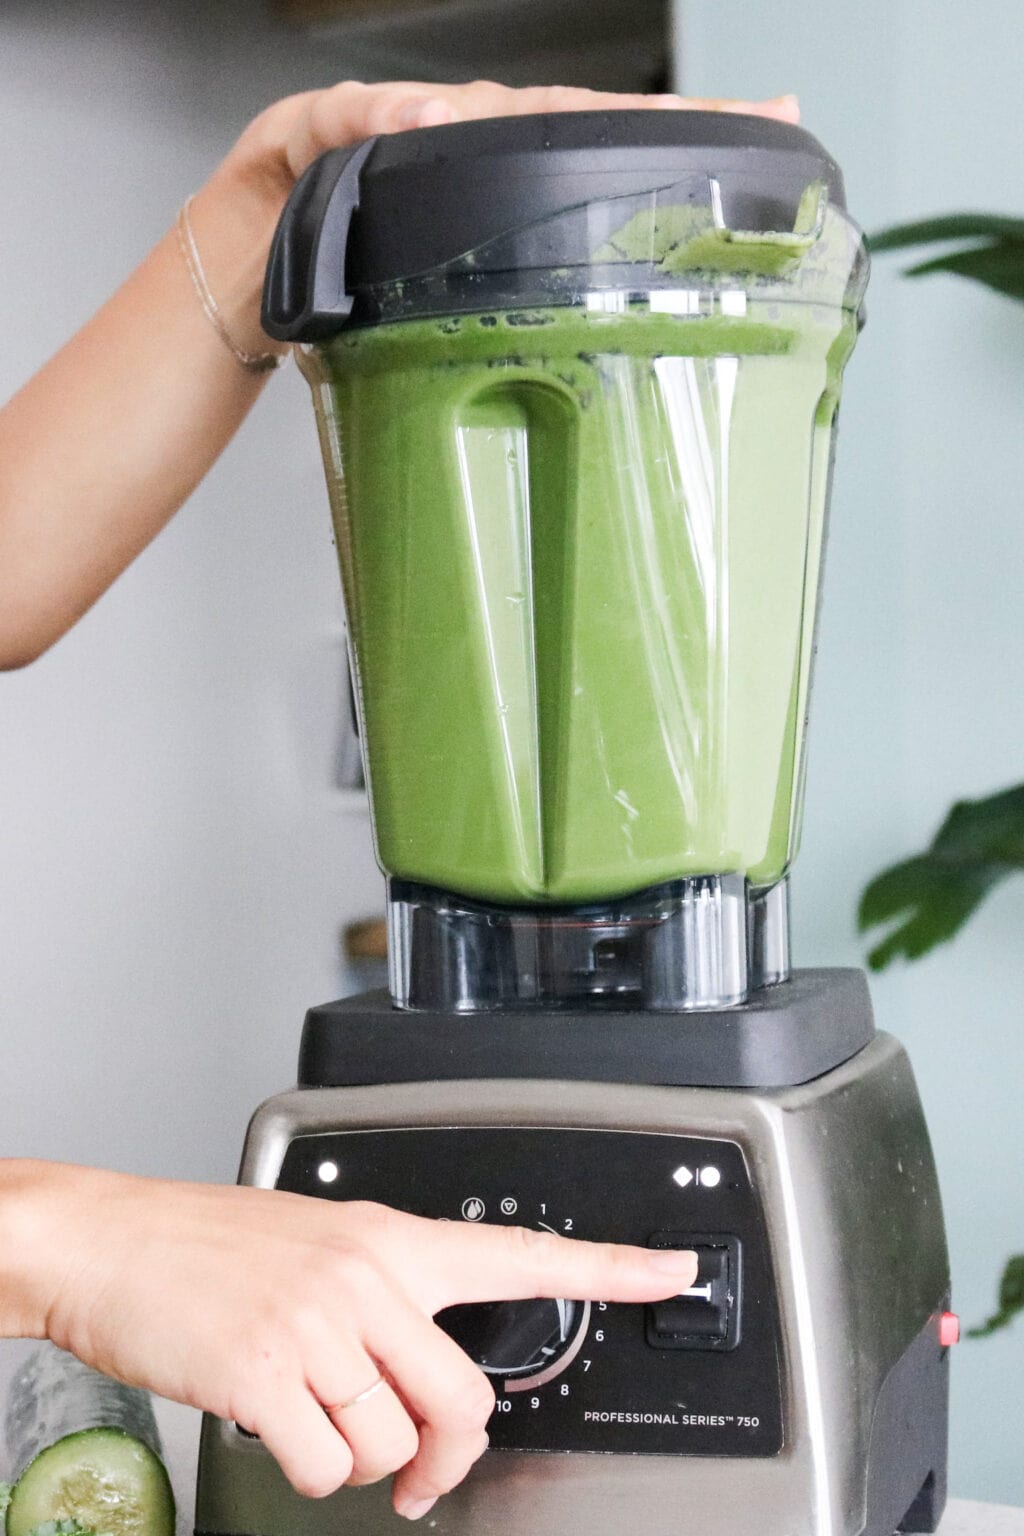 Vitamix as a Juicer - How to Make Juice in a Vitamix